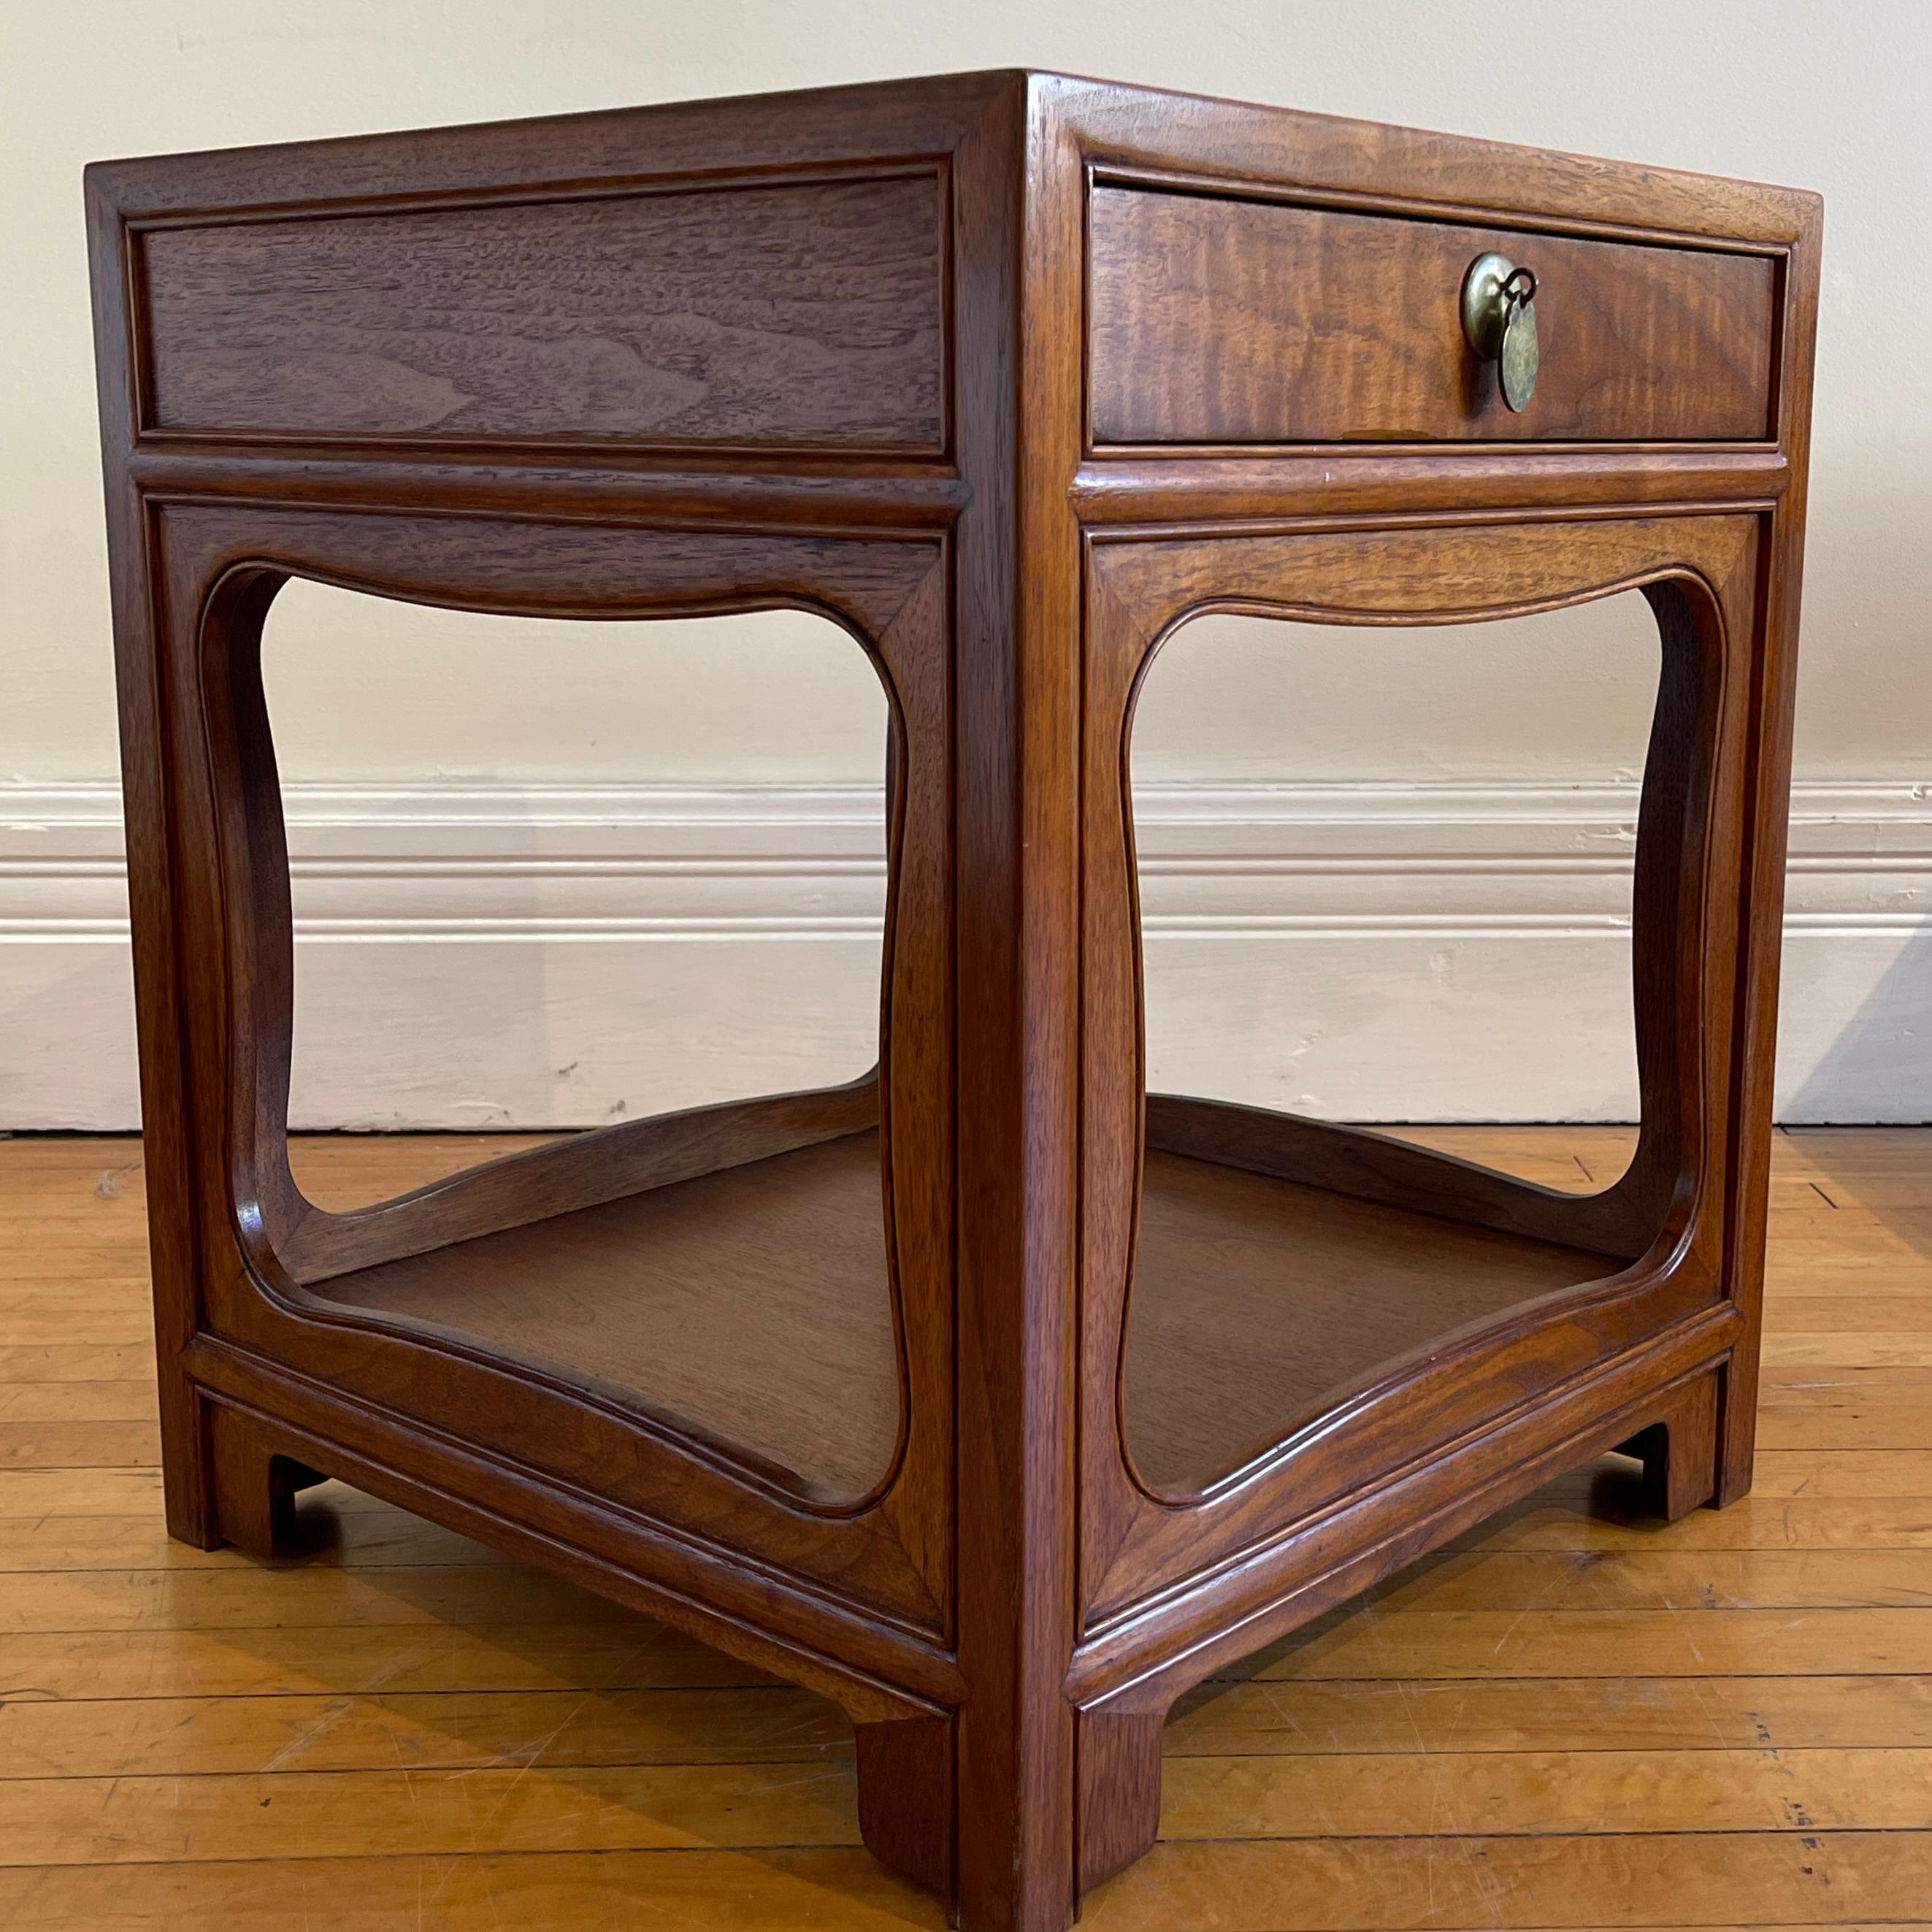 Excellent Pair of Walnut End Tables / Nightstands by Michael Taylor for Baker 1